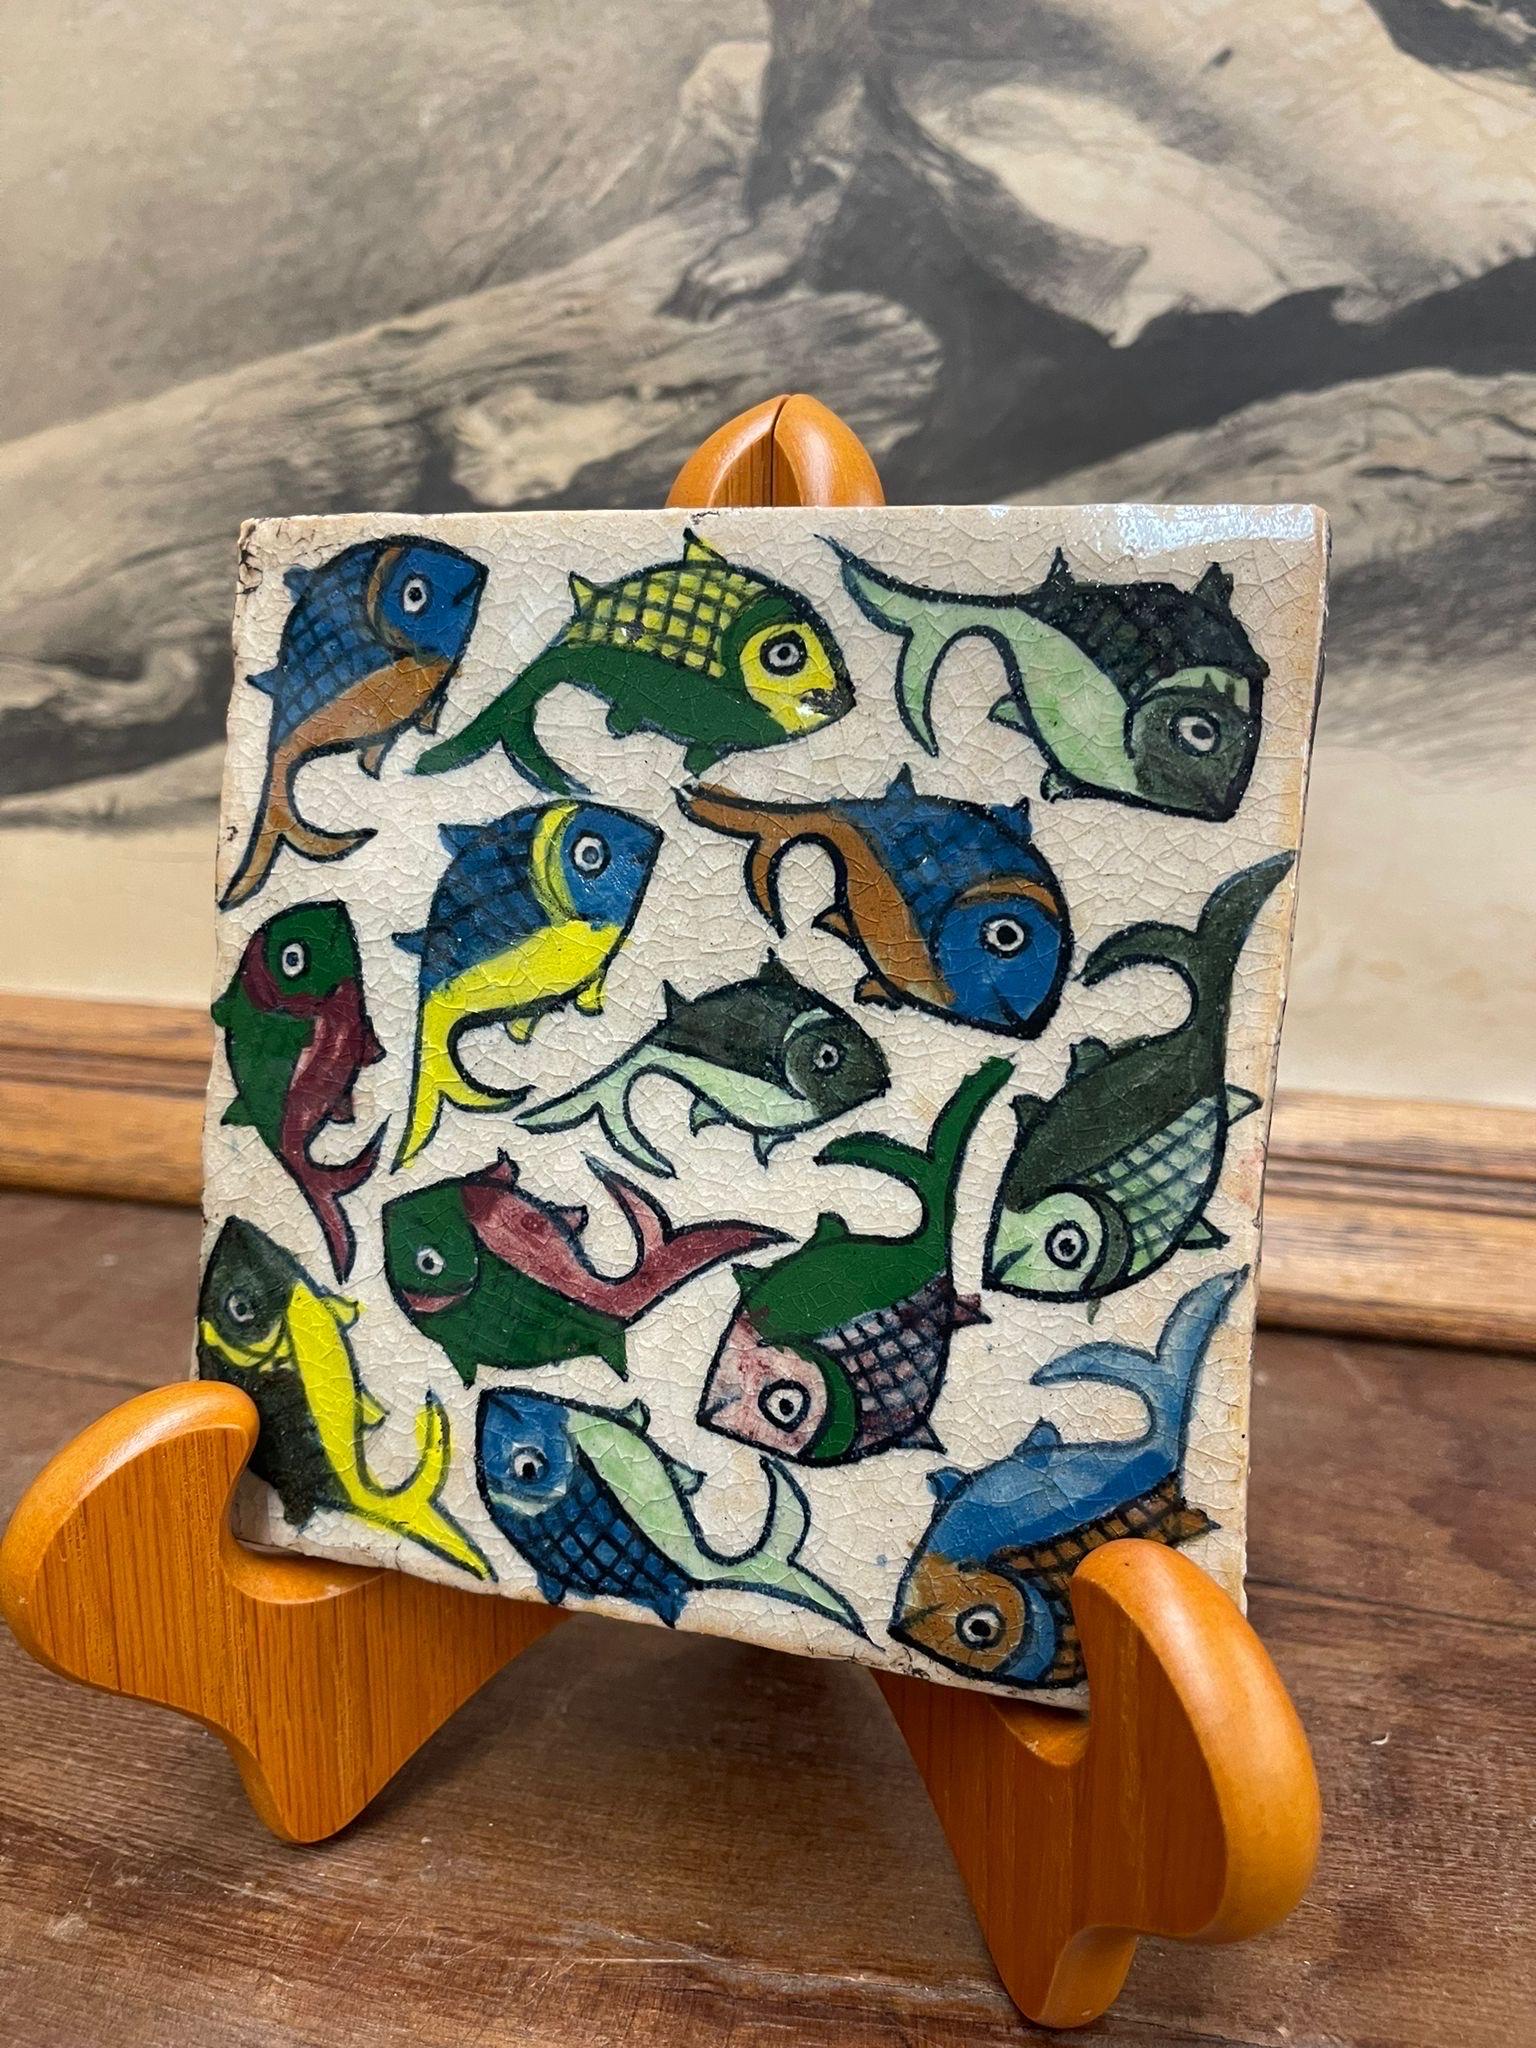 Mid-Century Modern Vintage Hand Painted Italian Tile With Swimming Fish Motif. For Sale